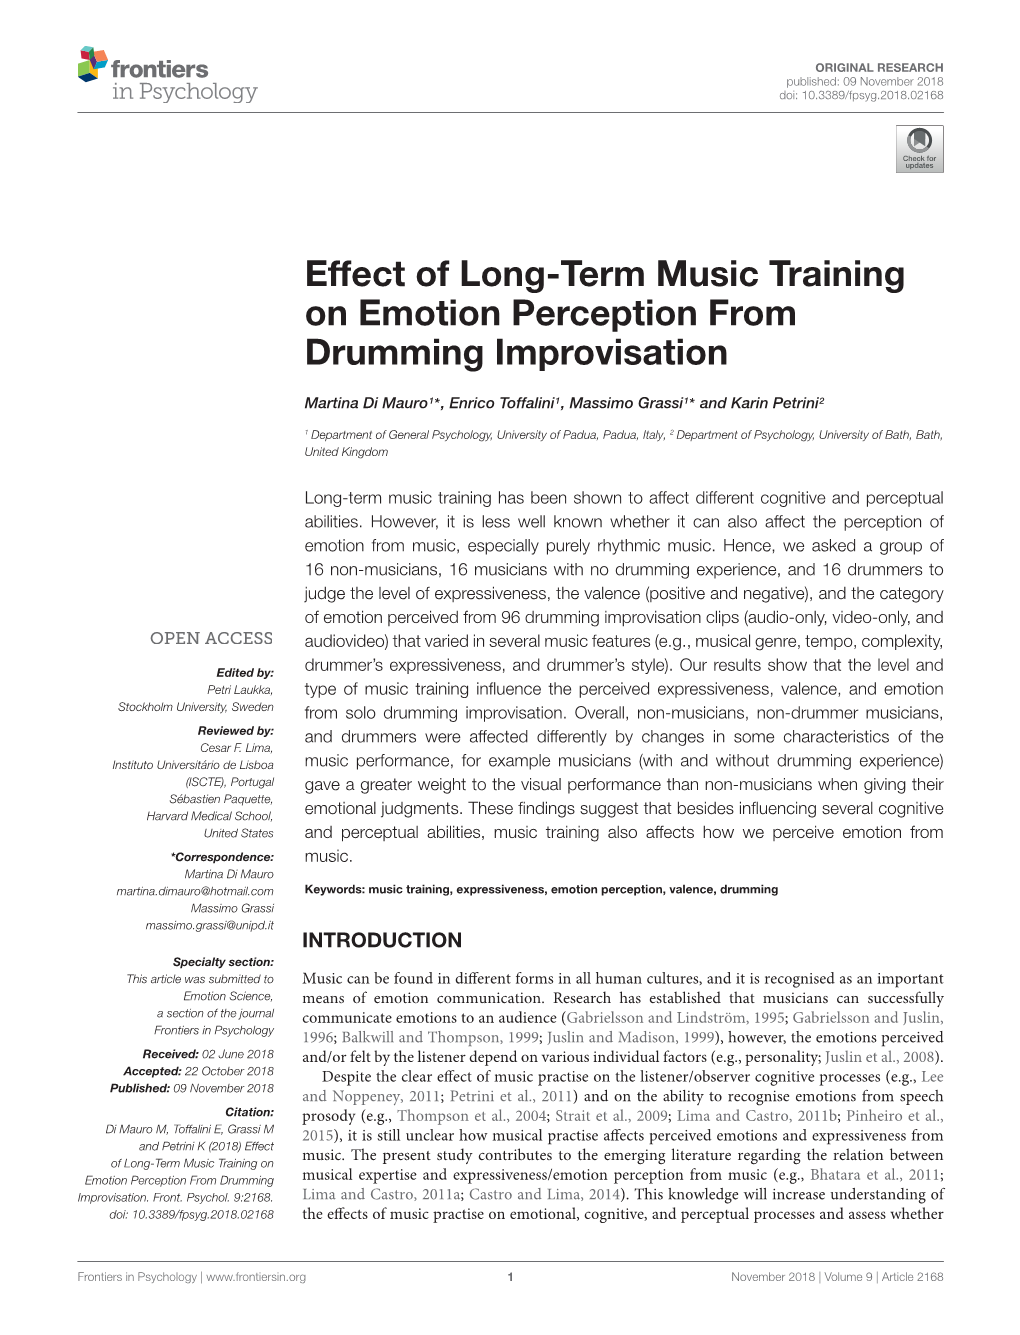 Effect of Long-Term Music Training on Emotion Perception from Drumming Improvisation